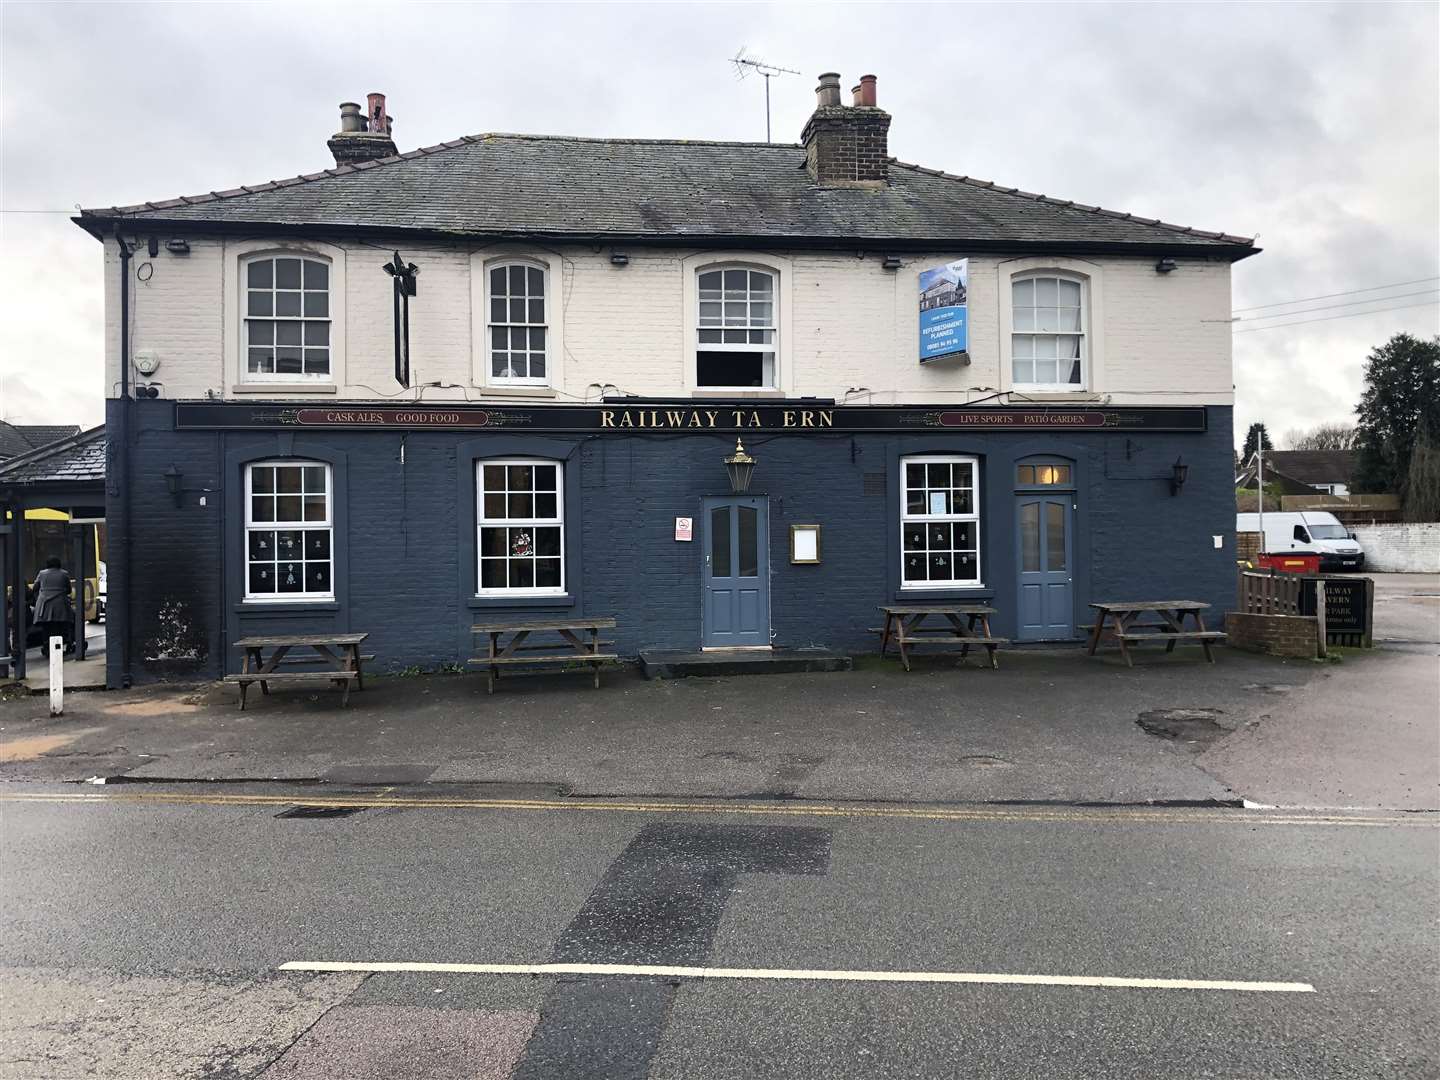 The Railway Tavern in Station Road, Longfield was full of punters when the arsonist struck